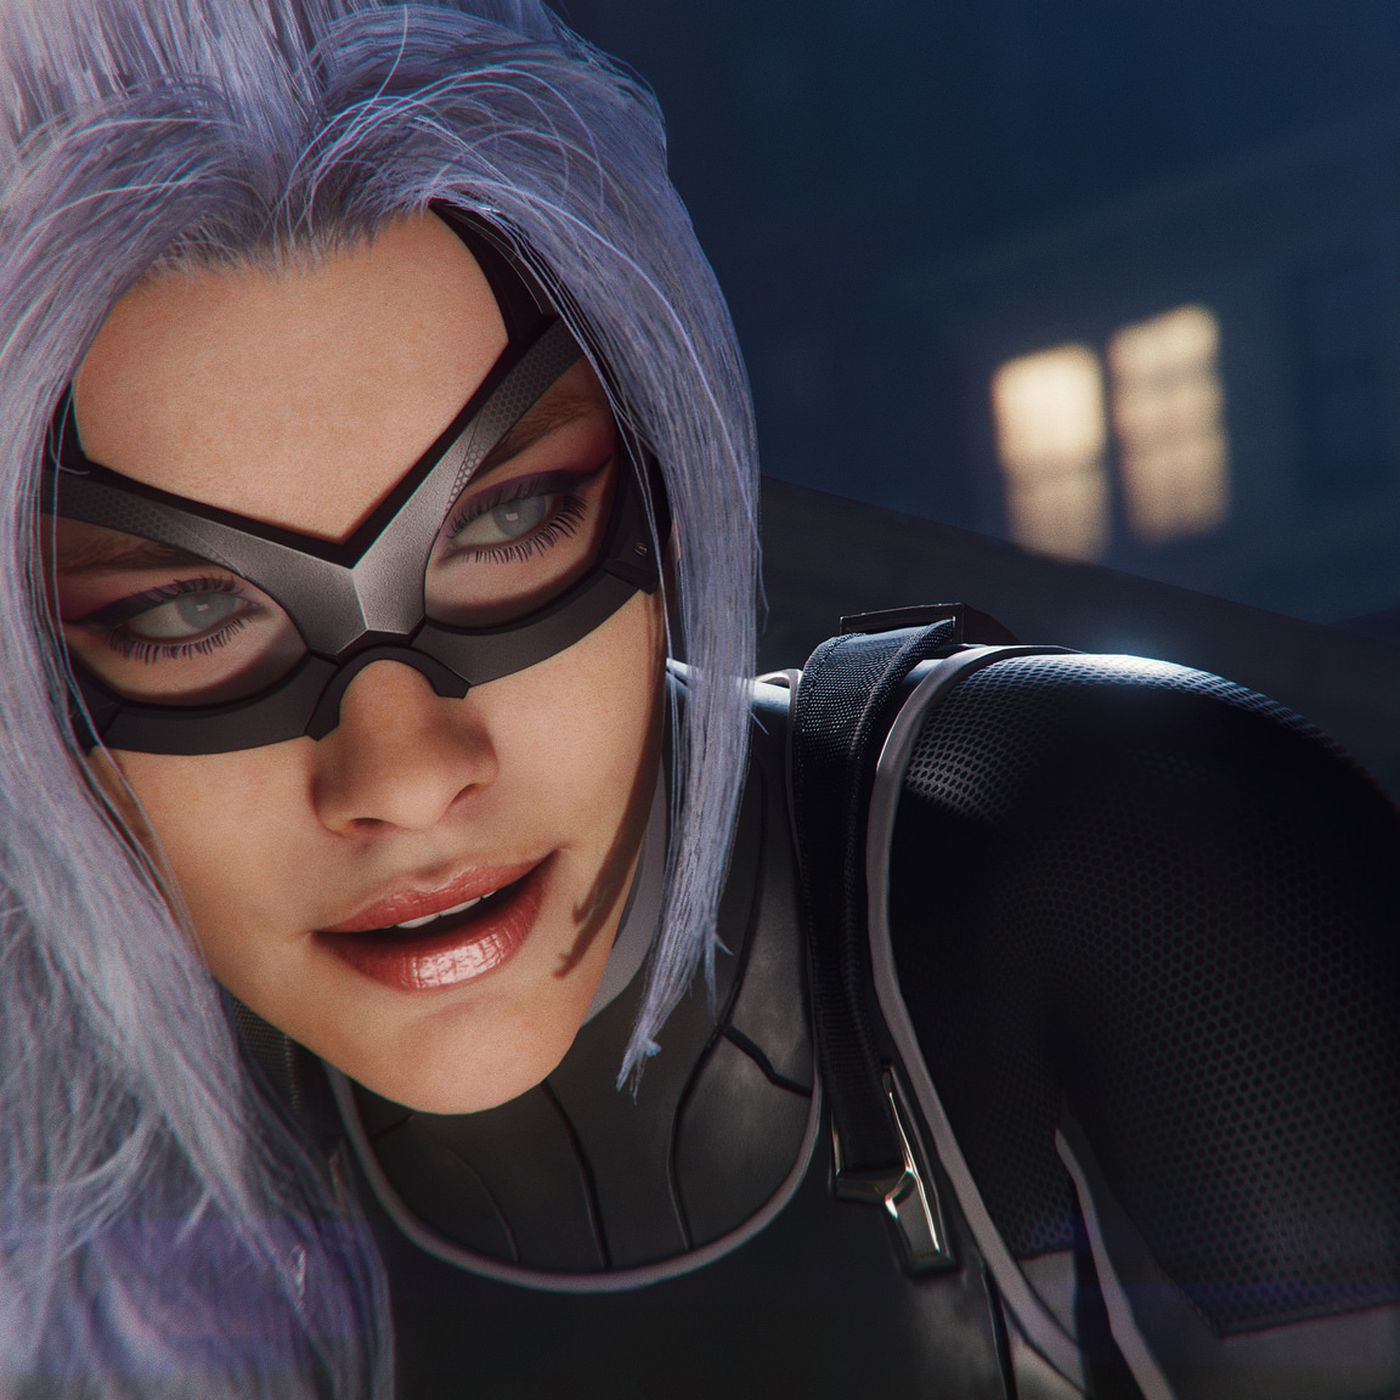 Spider Man Ps4 S New Dlc Makes Some Changes To The Original Black